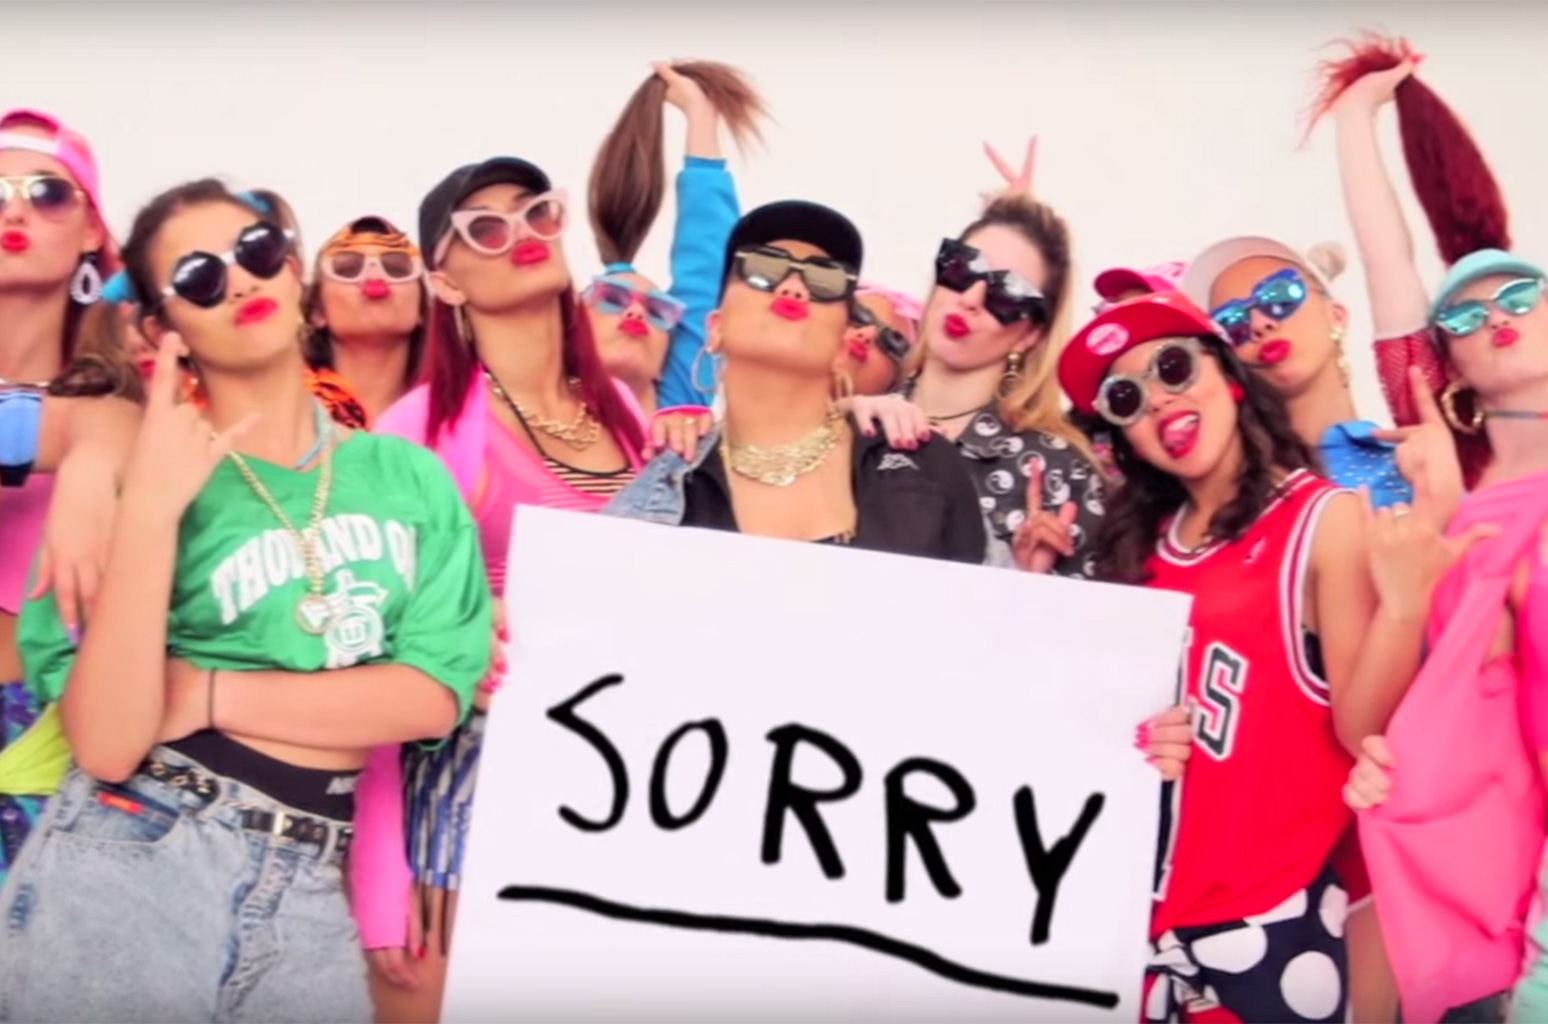 Justin Bieber - Sorry : Official Video And Lyrics